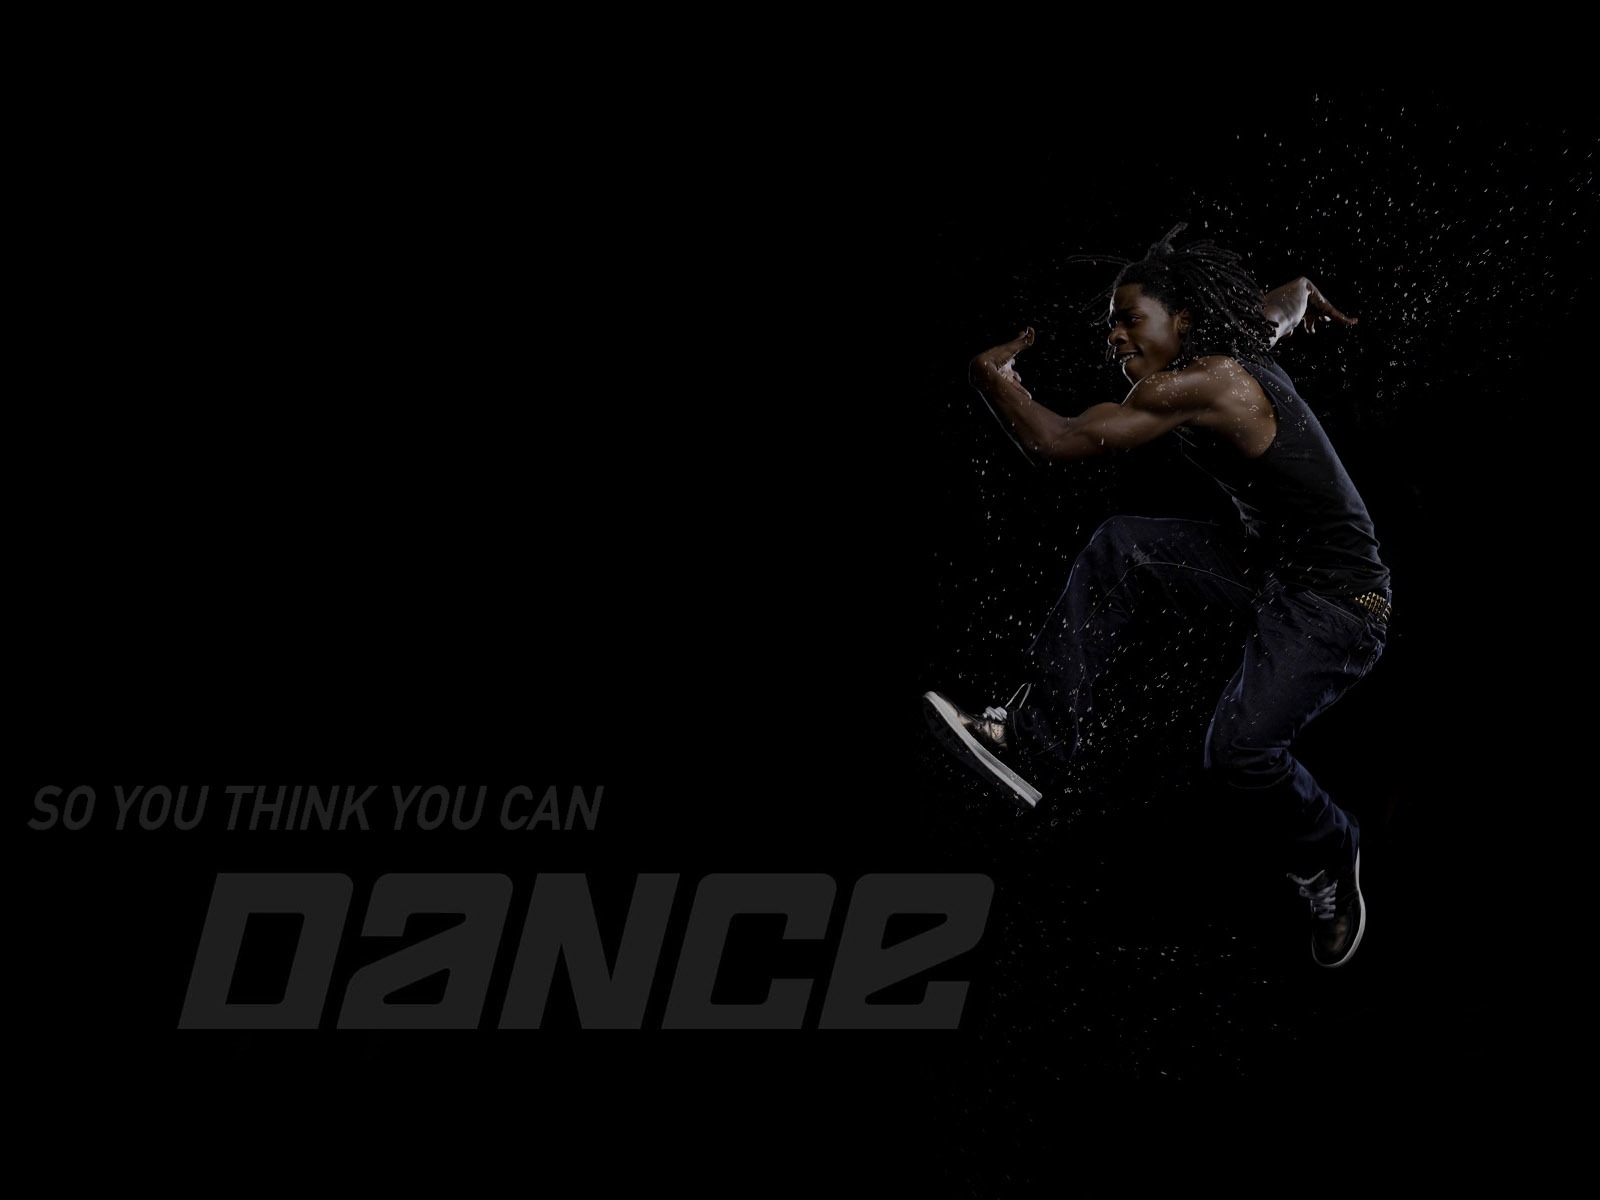 So You Think You Can Dance wallpaper (2) #16 - 1600x1200